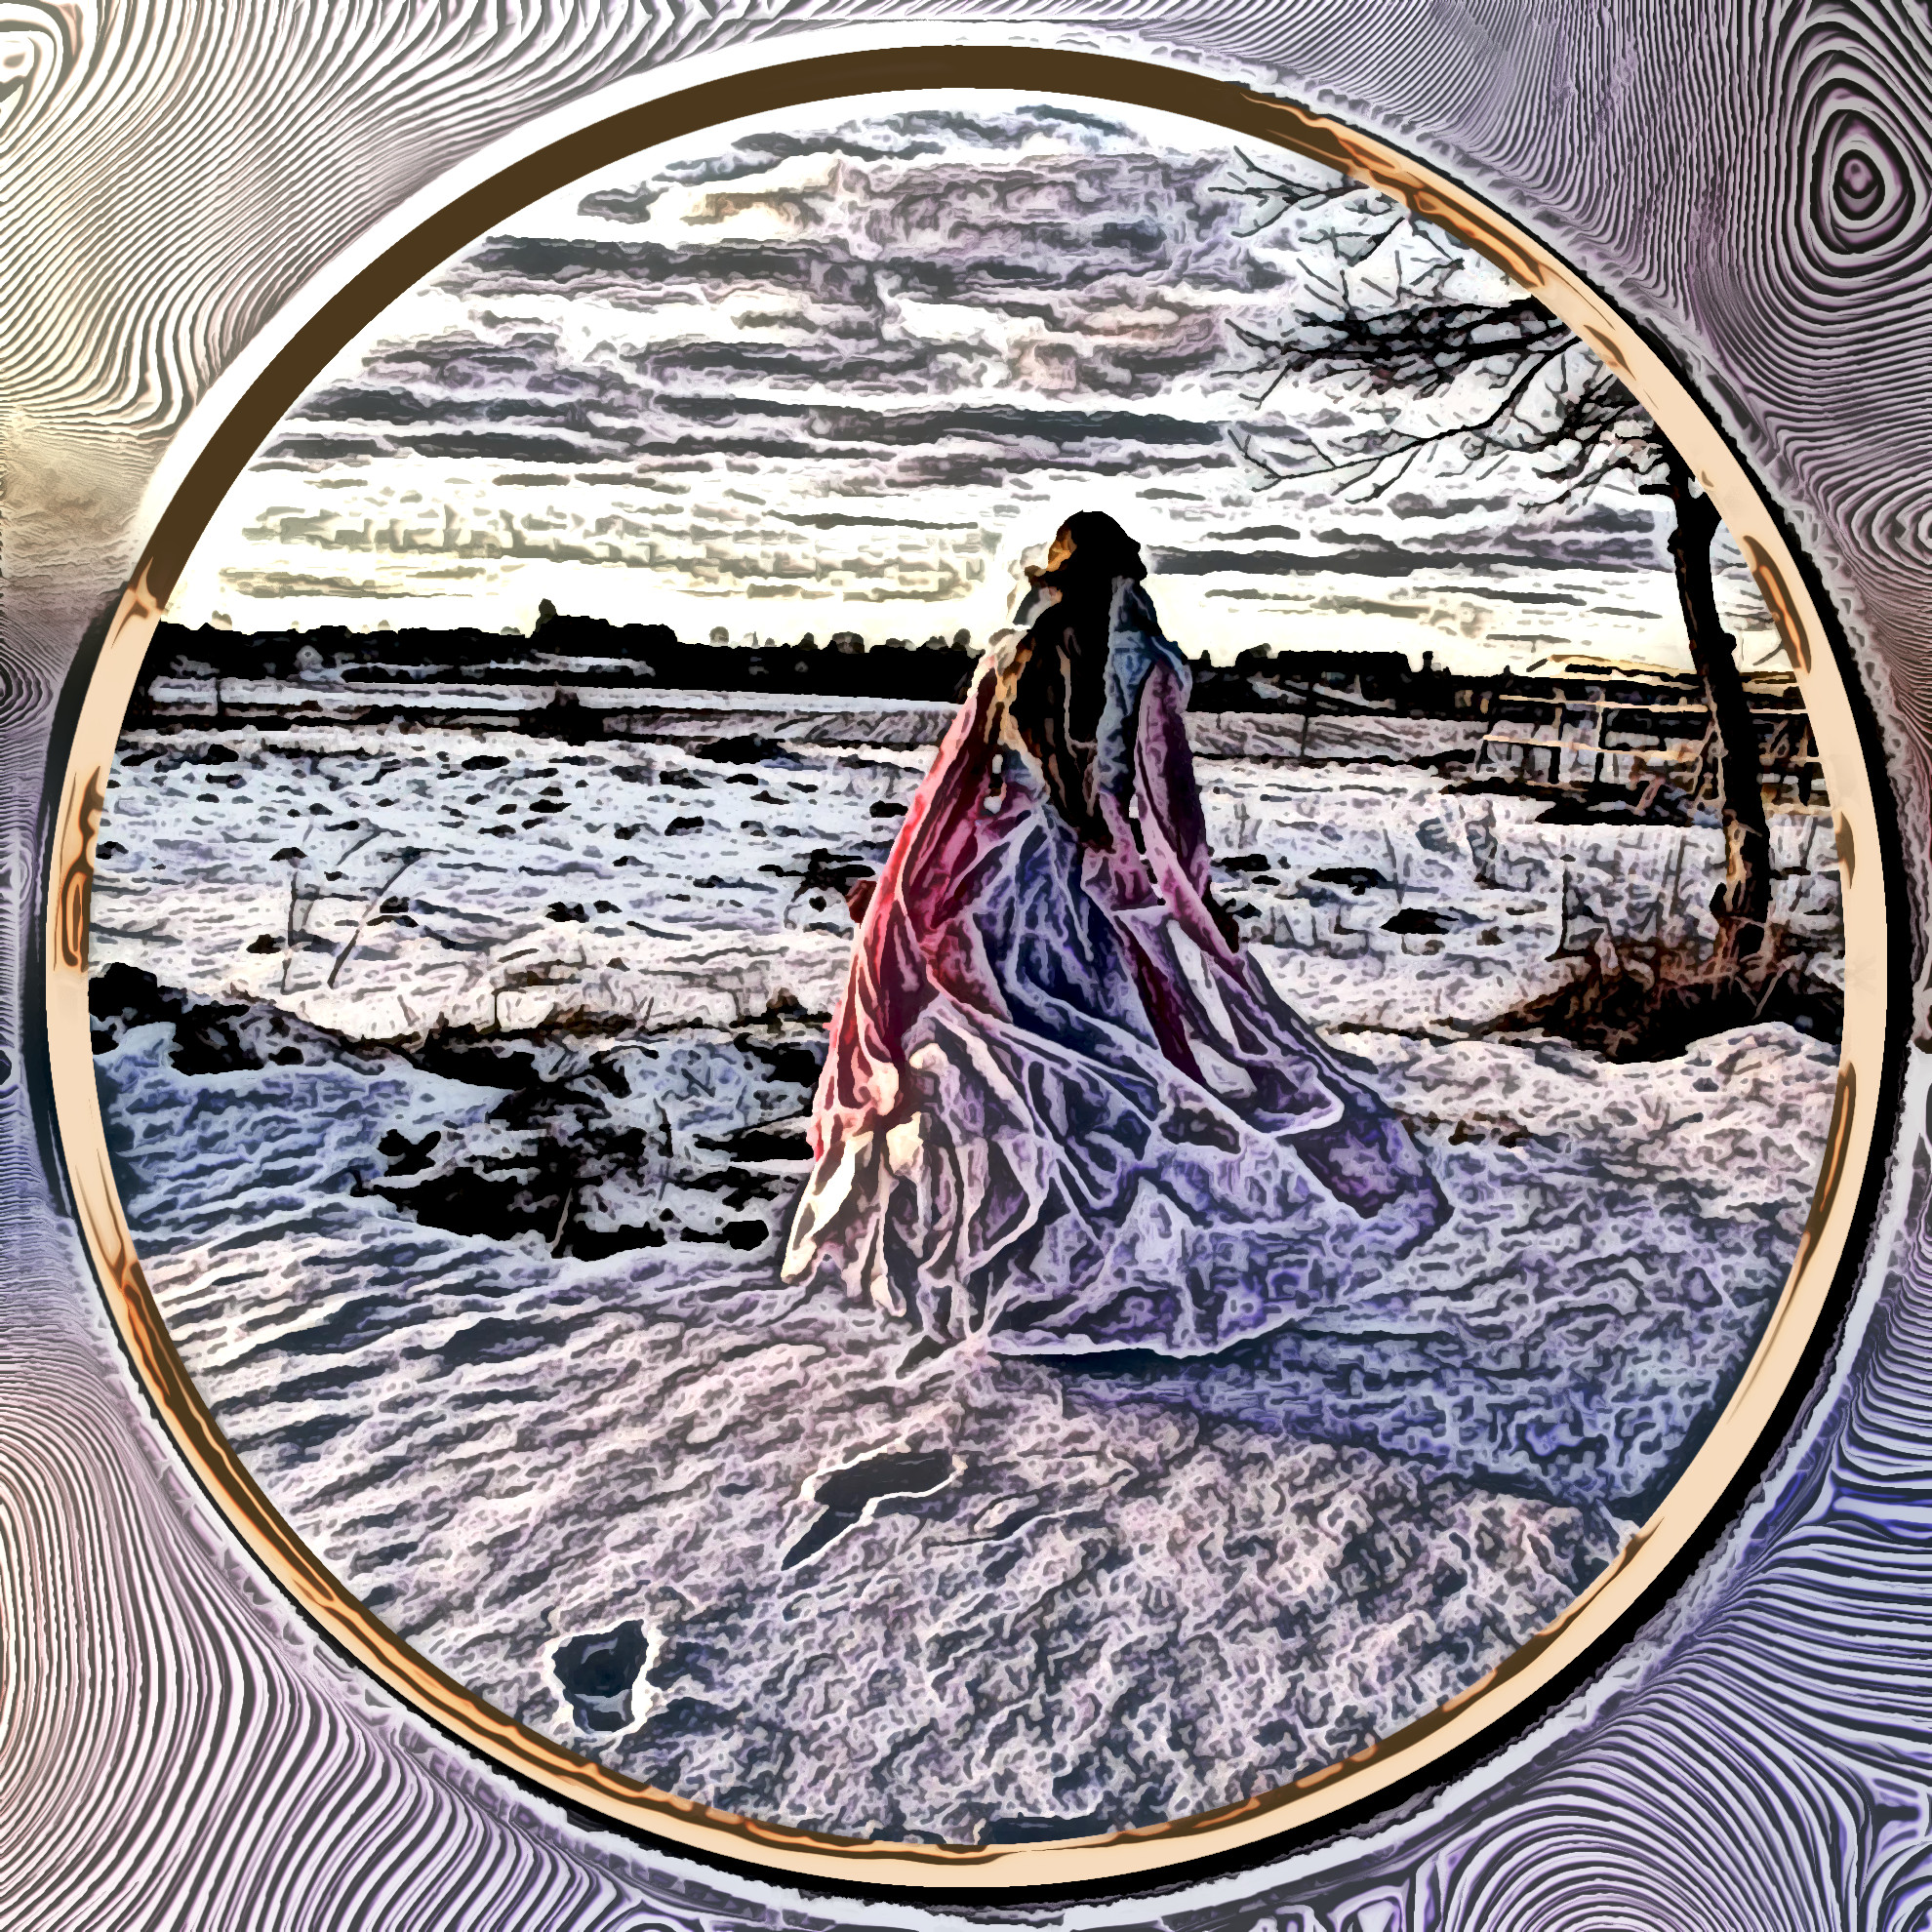 2023-05-30 13-46-21costume__winter_morning__by_aquilina108_dbl293k-fullview_portrai with a framed Artistic effect, style Painting.jpg